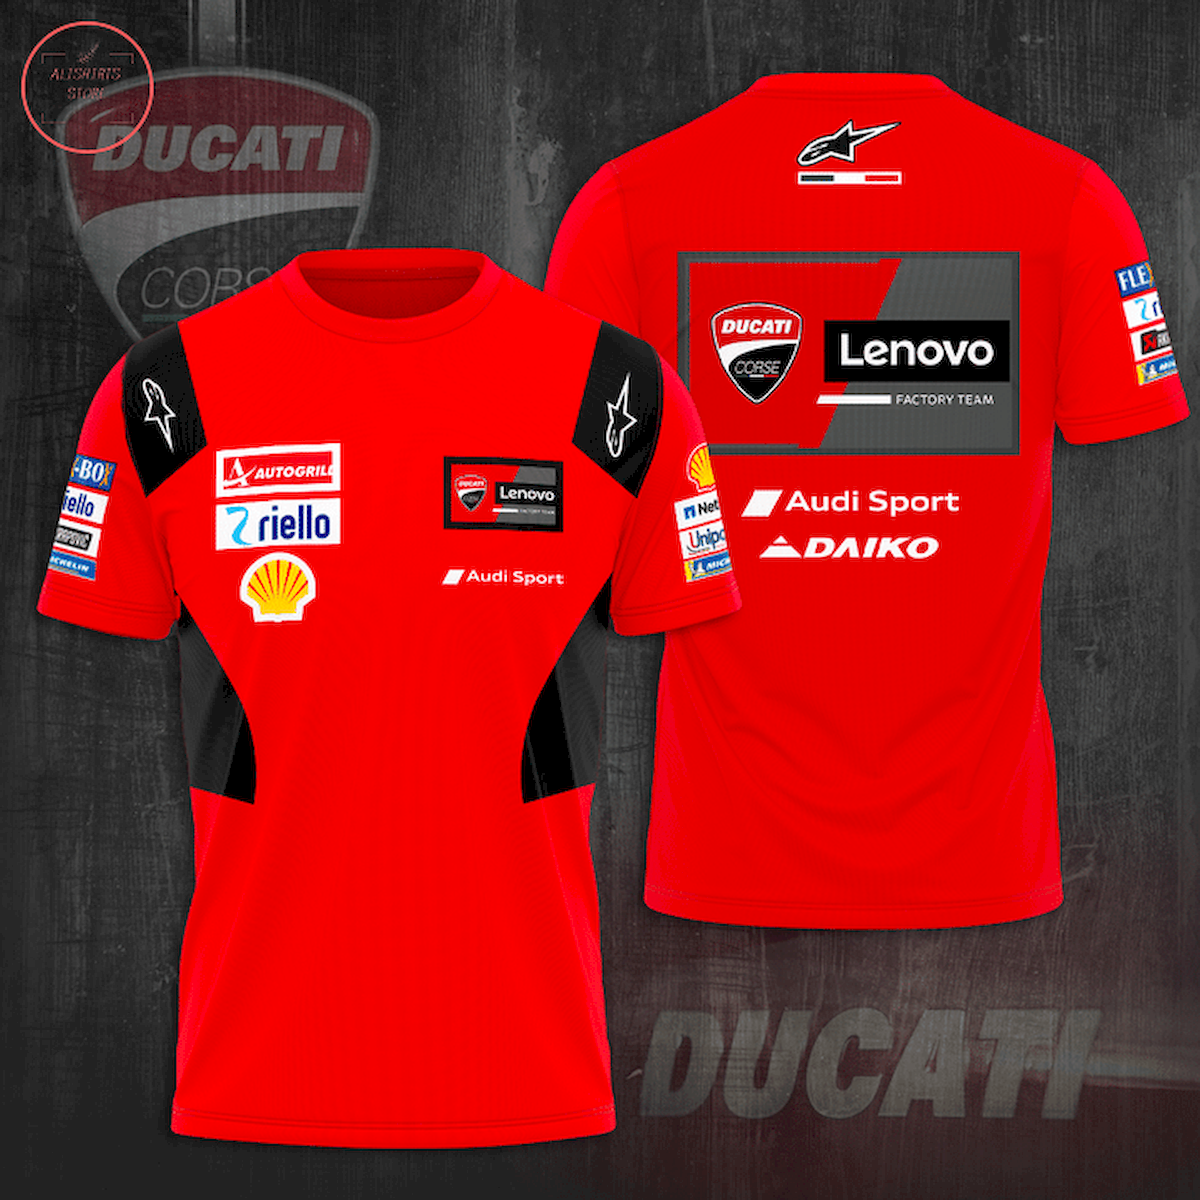 Ducati Lenovo Factory Team All Over Printed Shirts